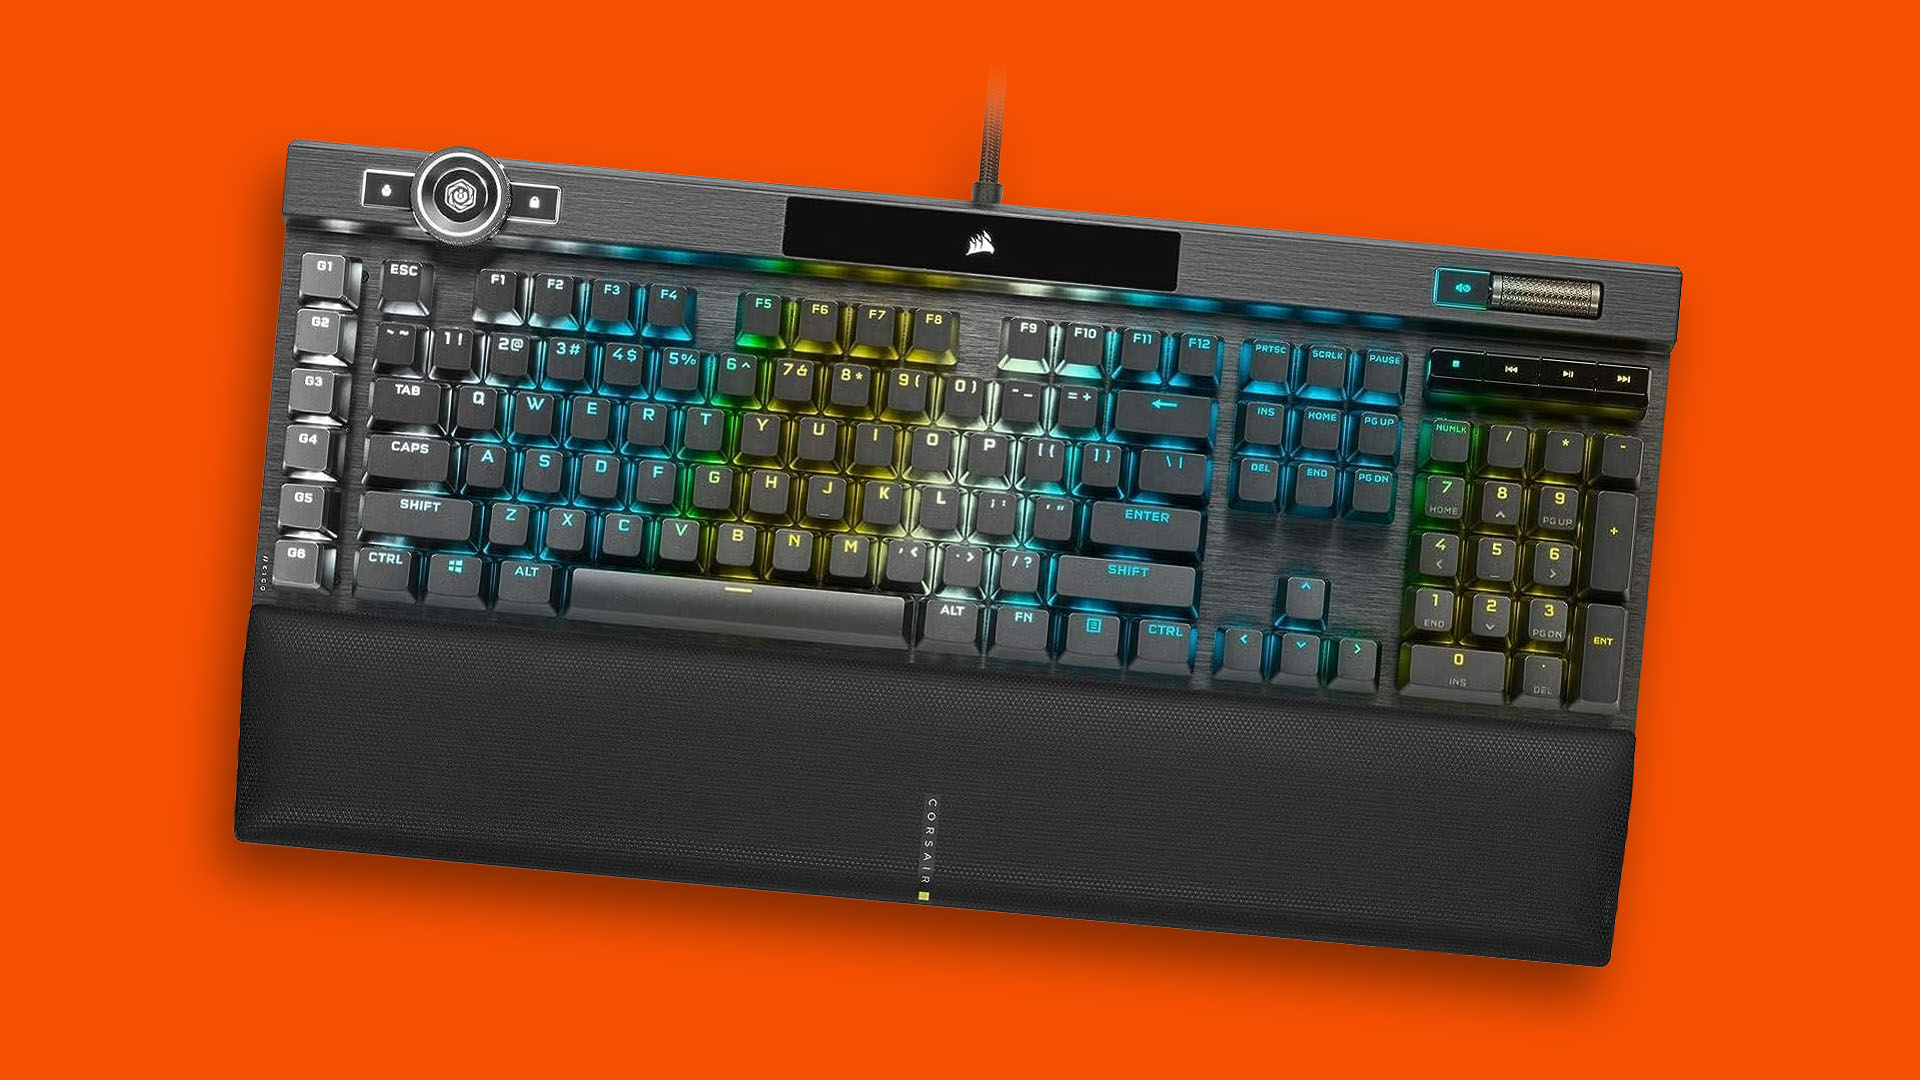 Save 28% on the Corsair K100 with this fantastic gaming keyboard deal